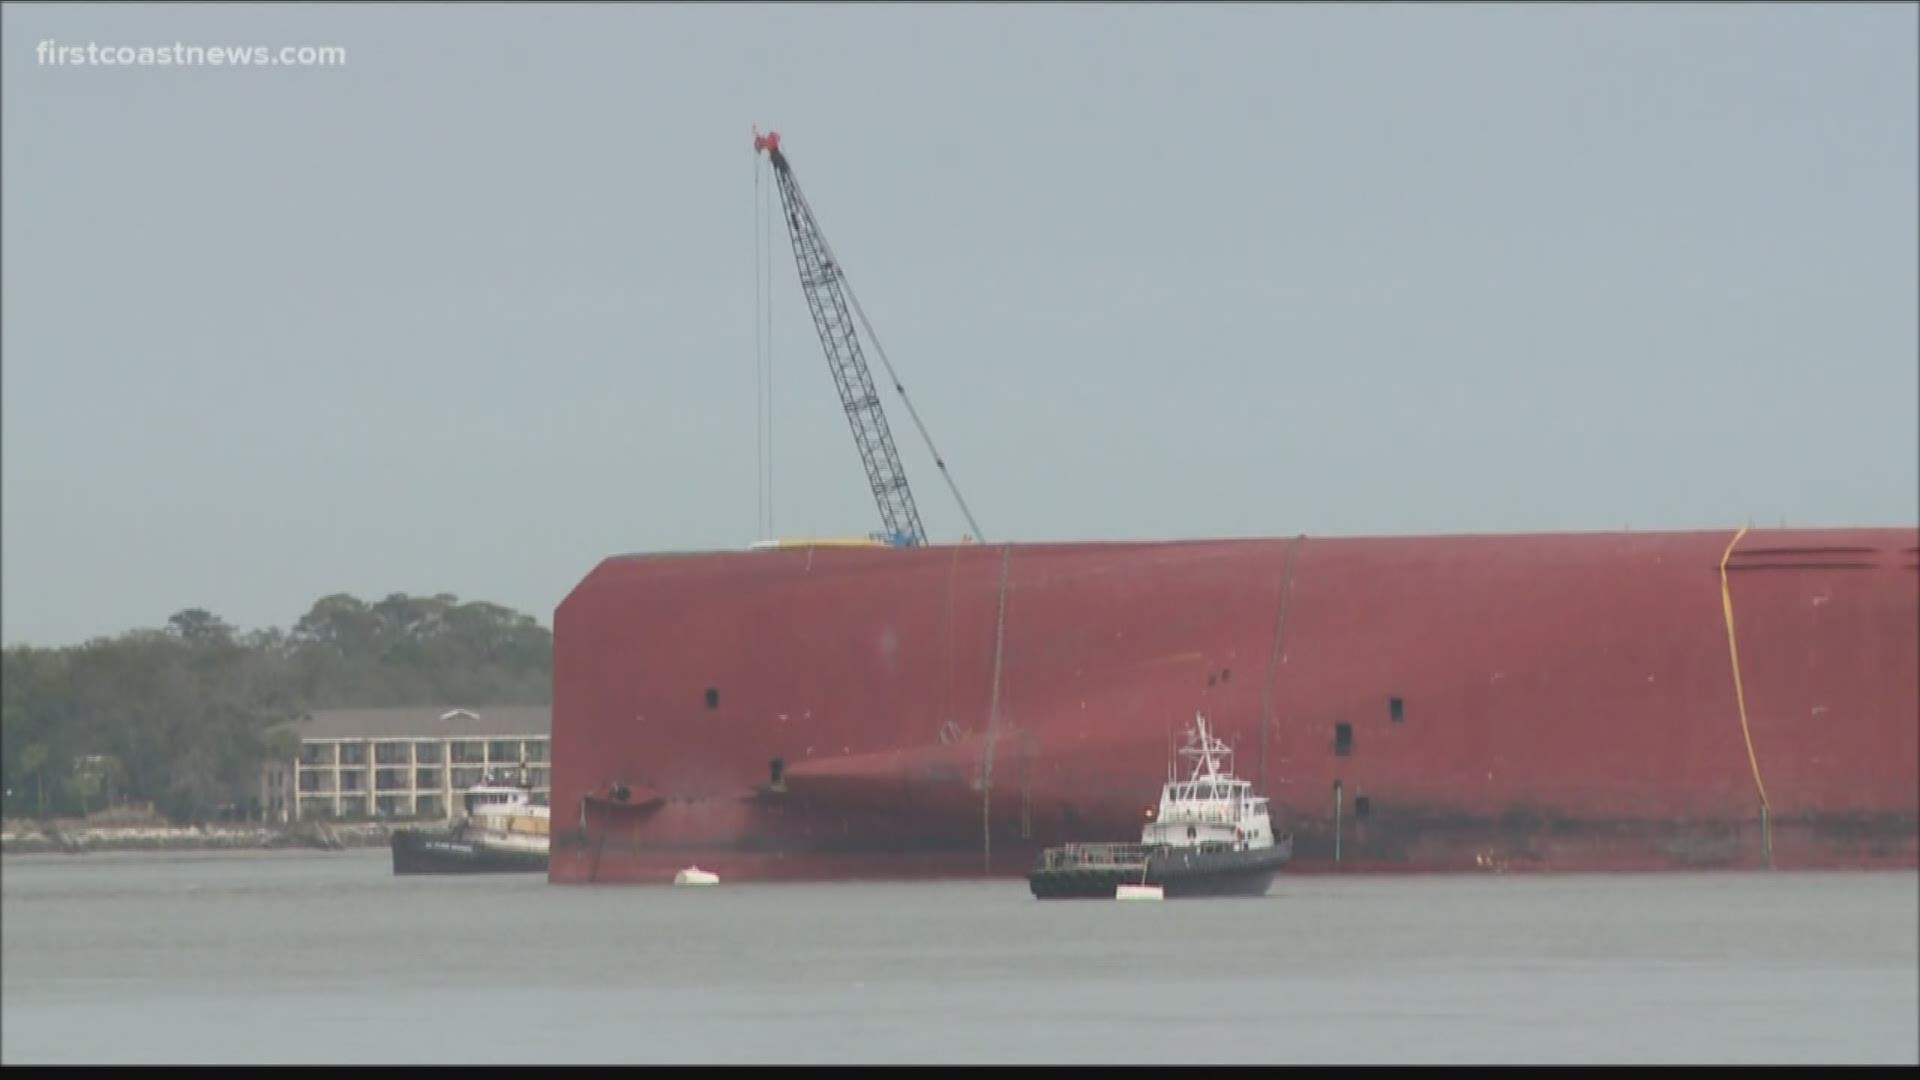 Salvage teams are working to build an environmental protection barrier around the overturned Golden Ray cargo ship in the waters off Jekyll Island.